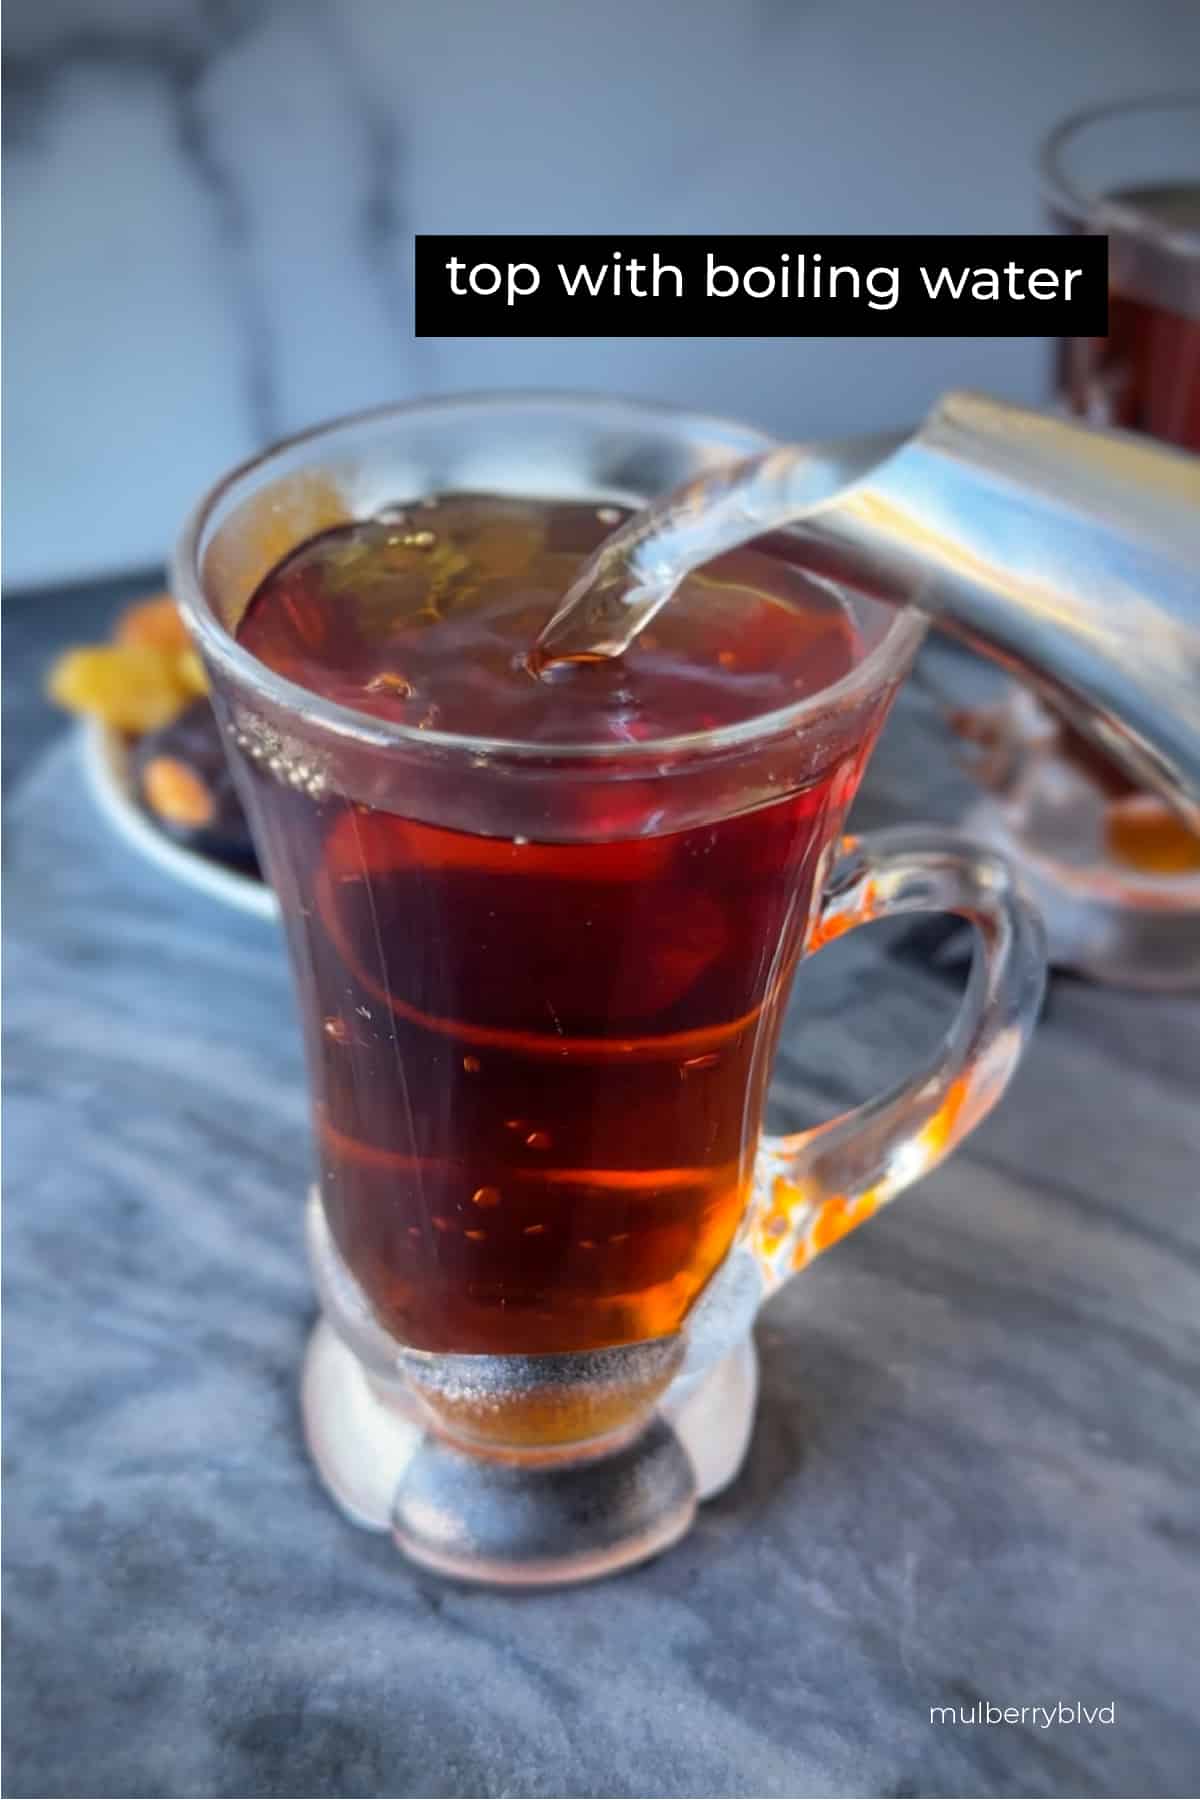 Hot water being added to tea in a glass cup